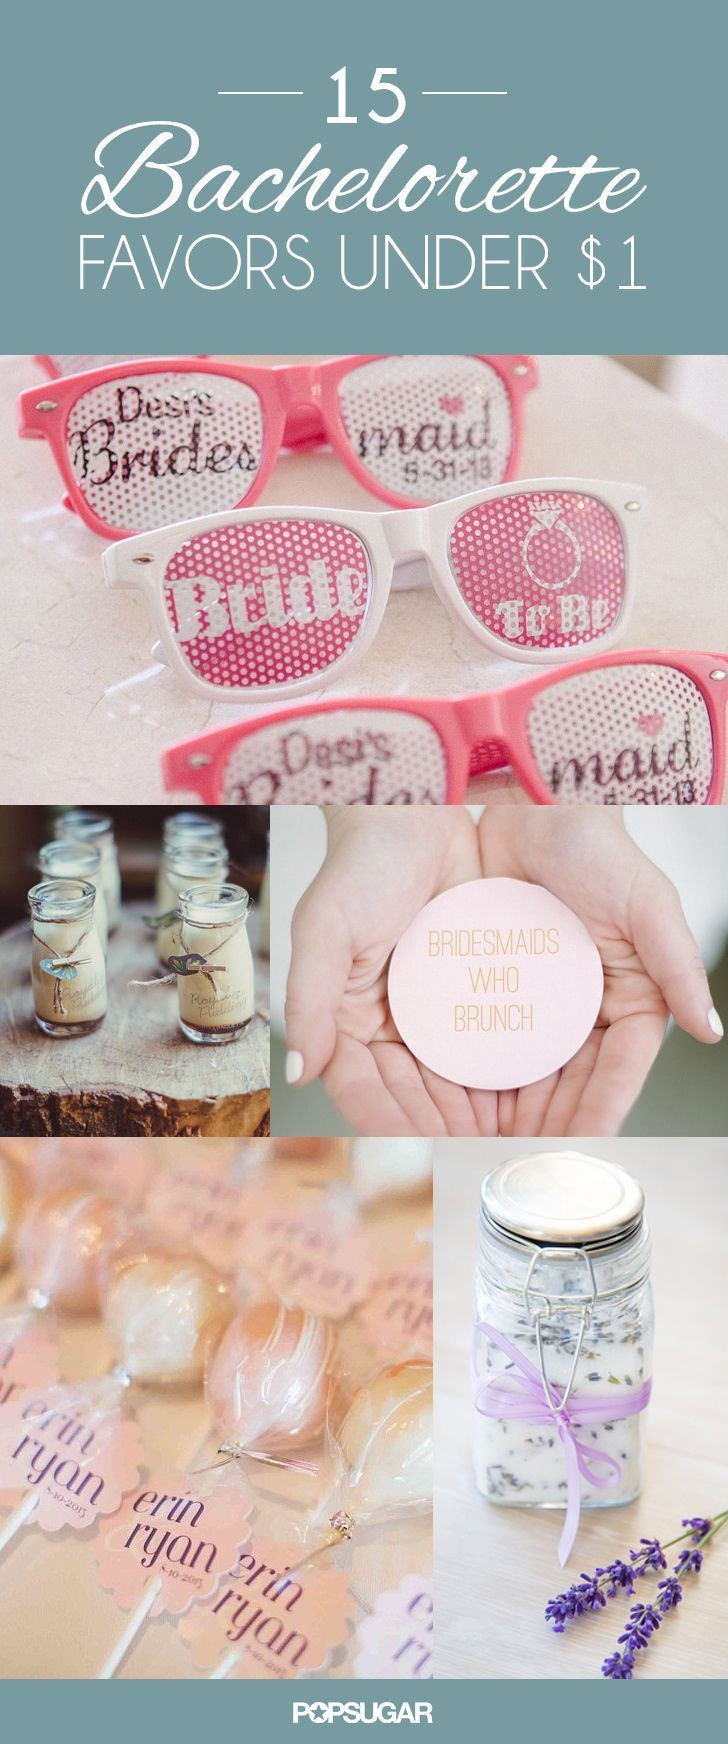 Bachelorette Party Ideas For Under 21 Bridesmaids
 40 Bachelorette Favors That Take the Party to a Whole New